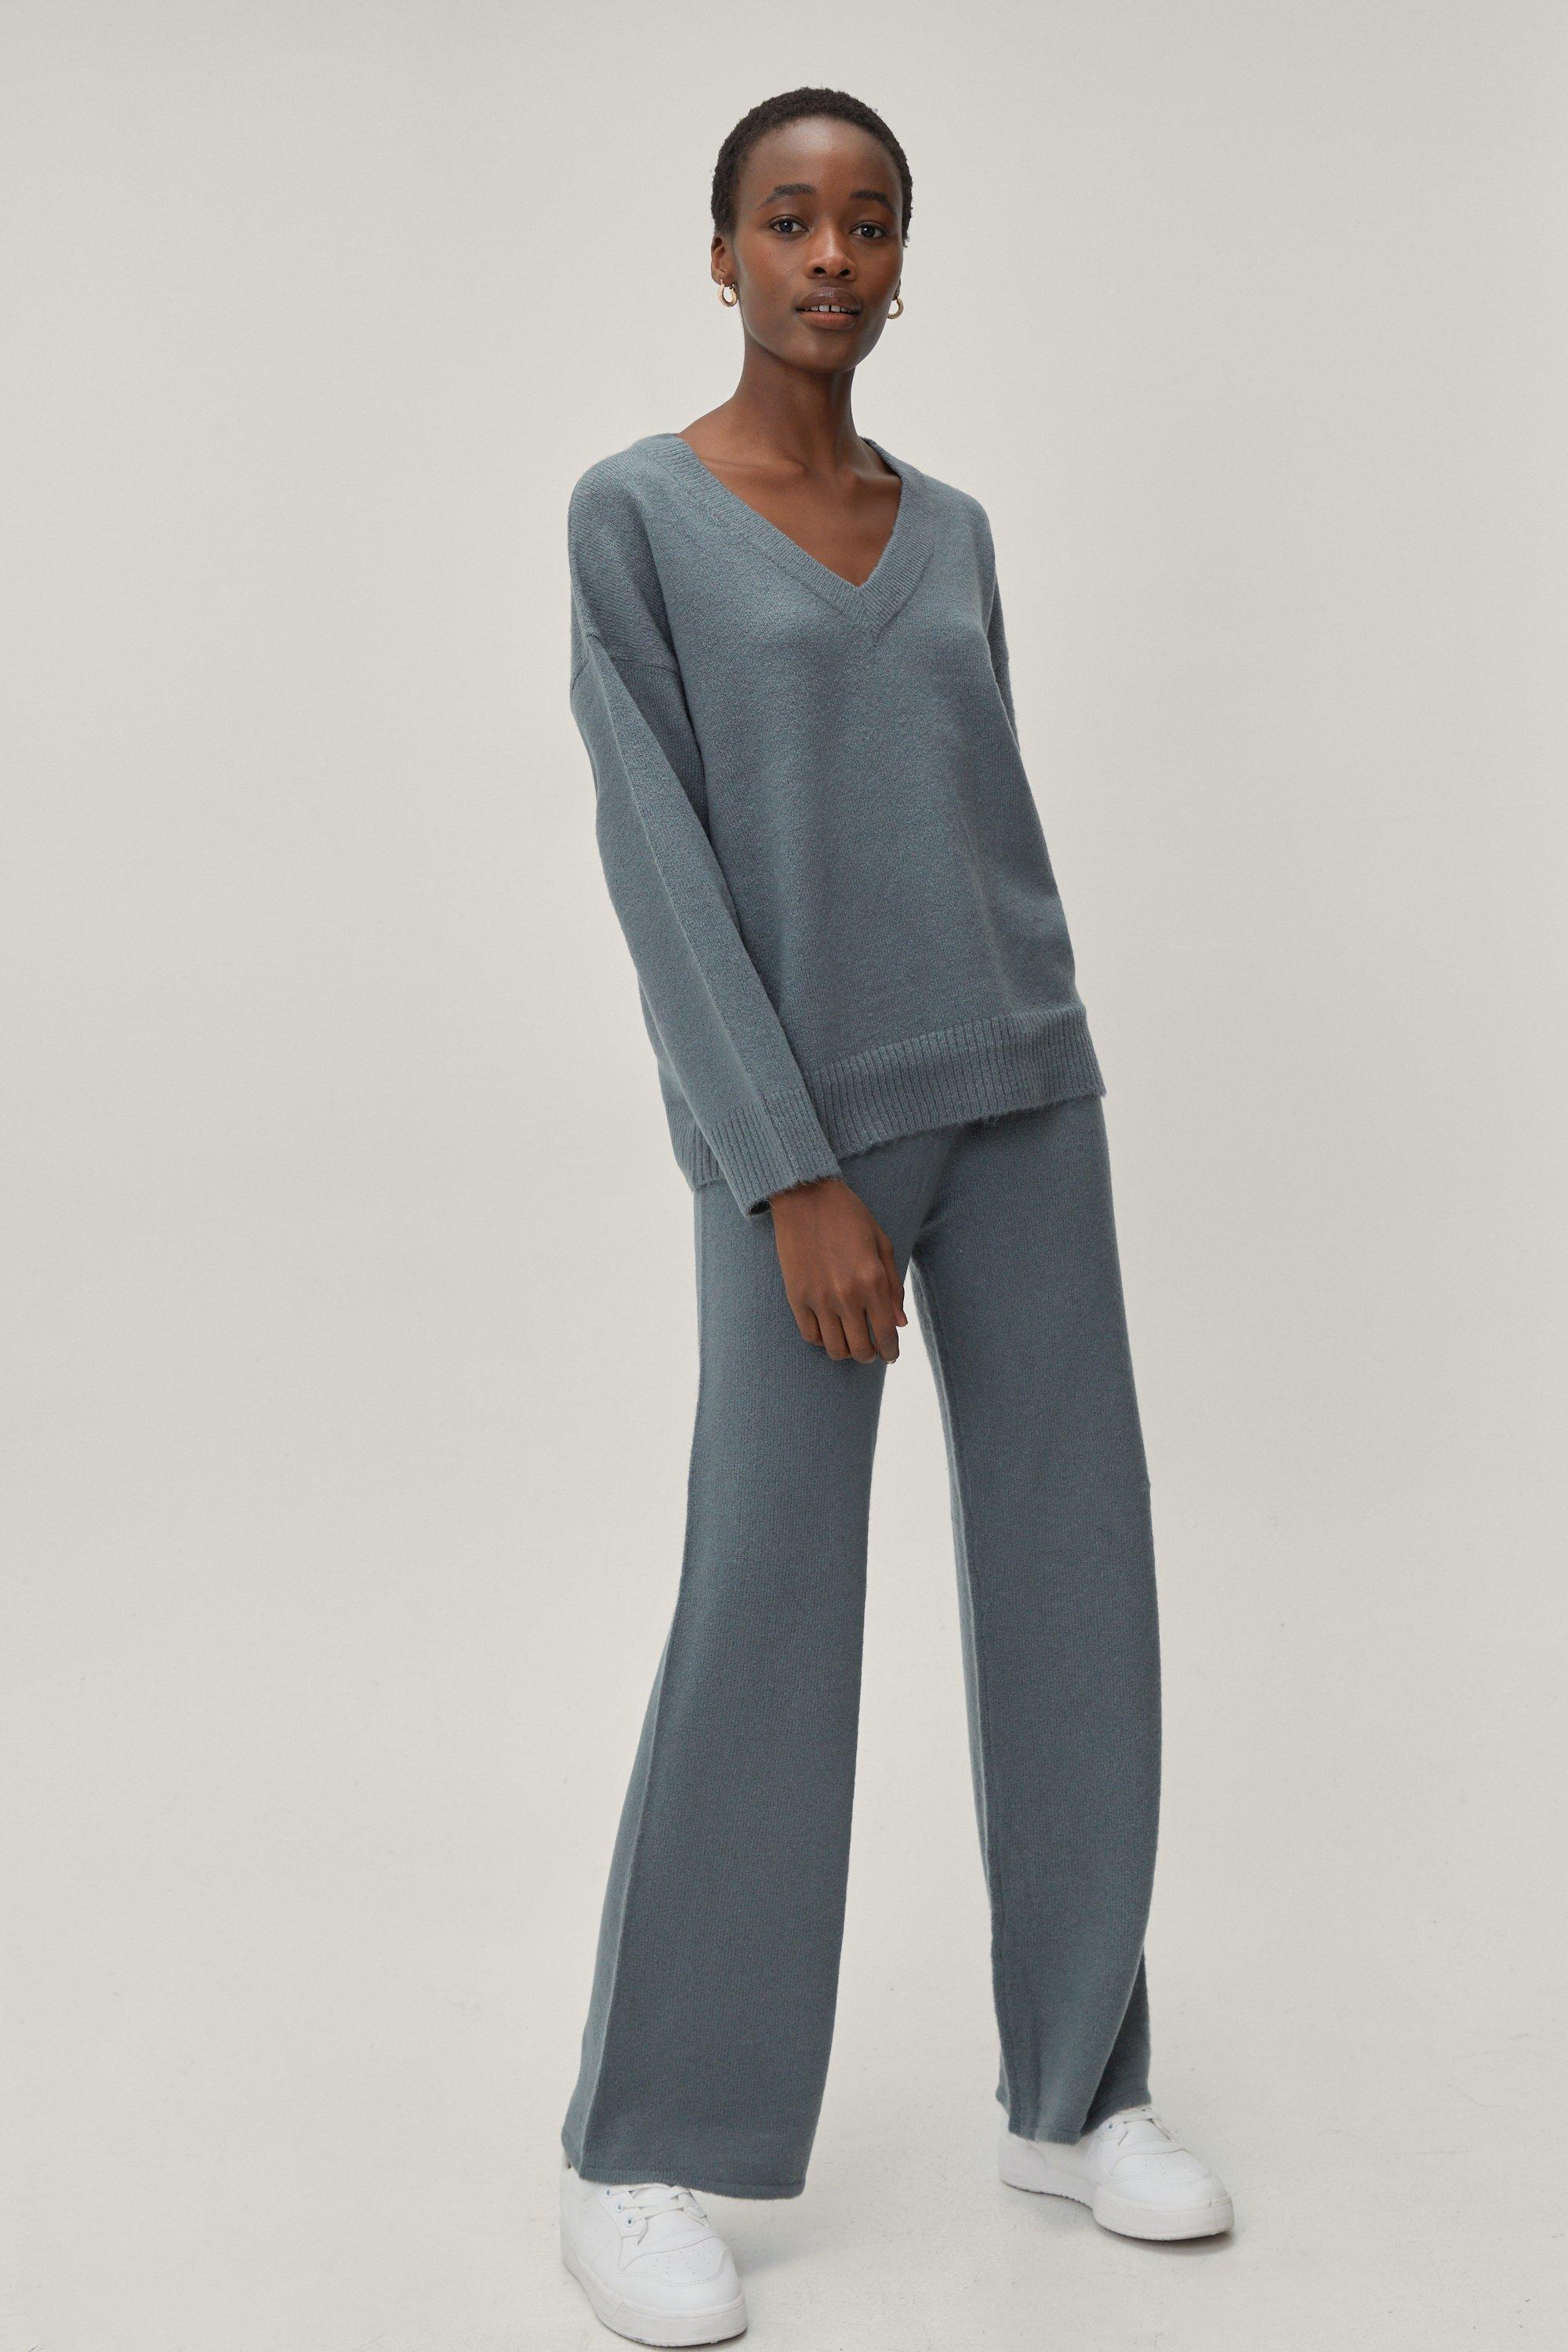 https://media.nastygal.com/i/nastygal/agg17554_blue_xl_1/knitted-v-neck-top-and-pants-loungewear-set